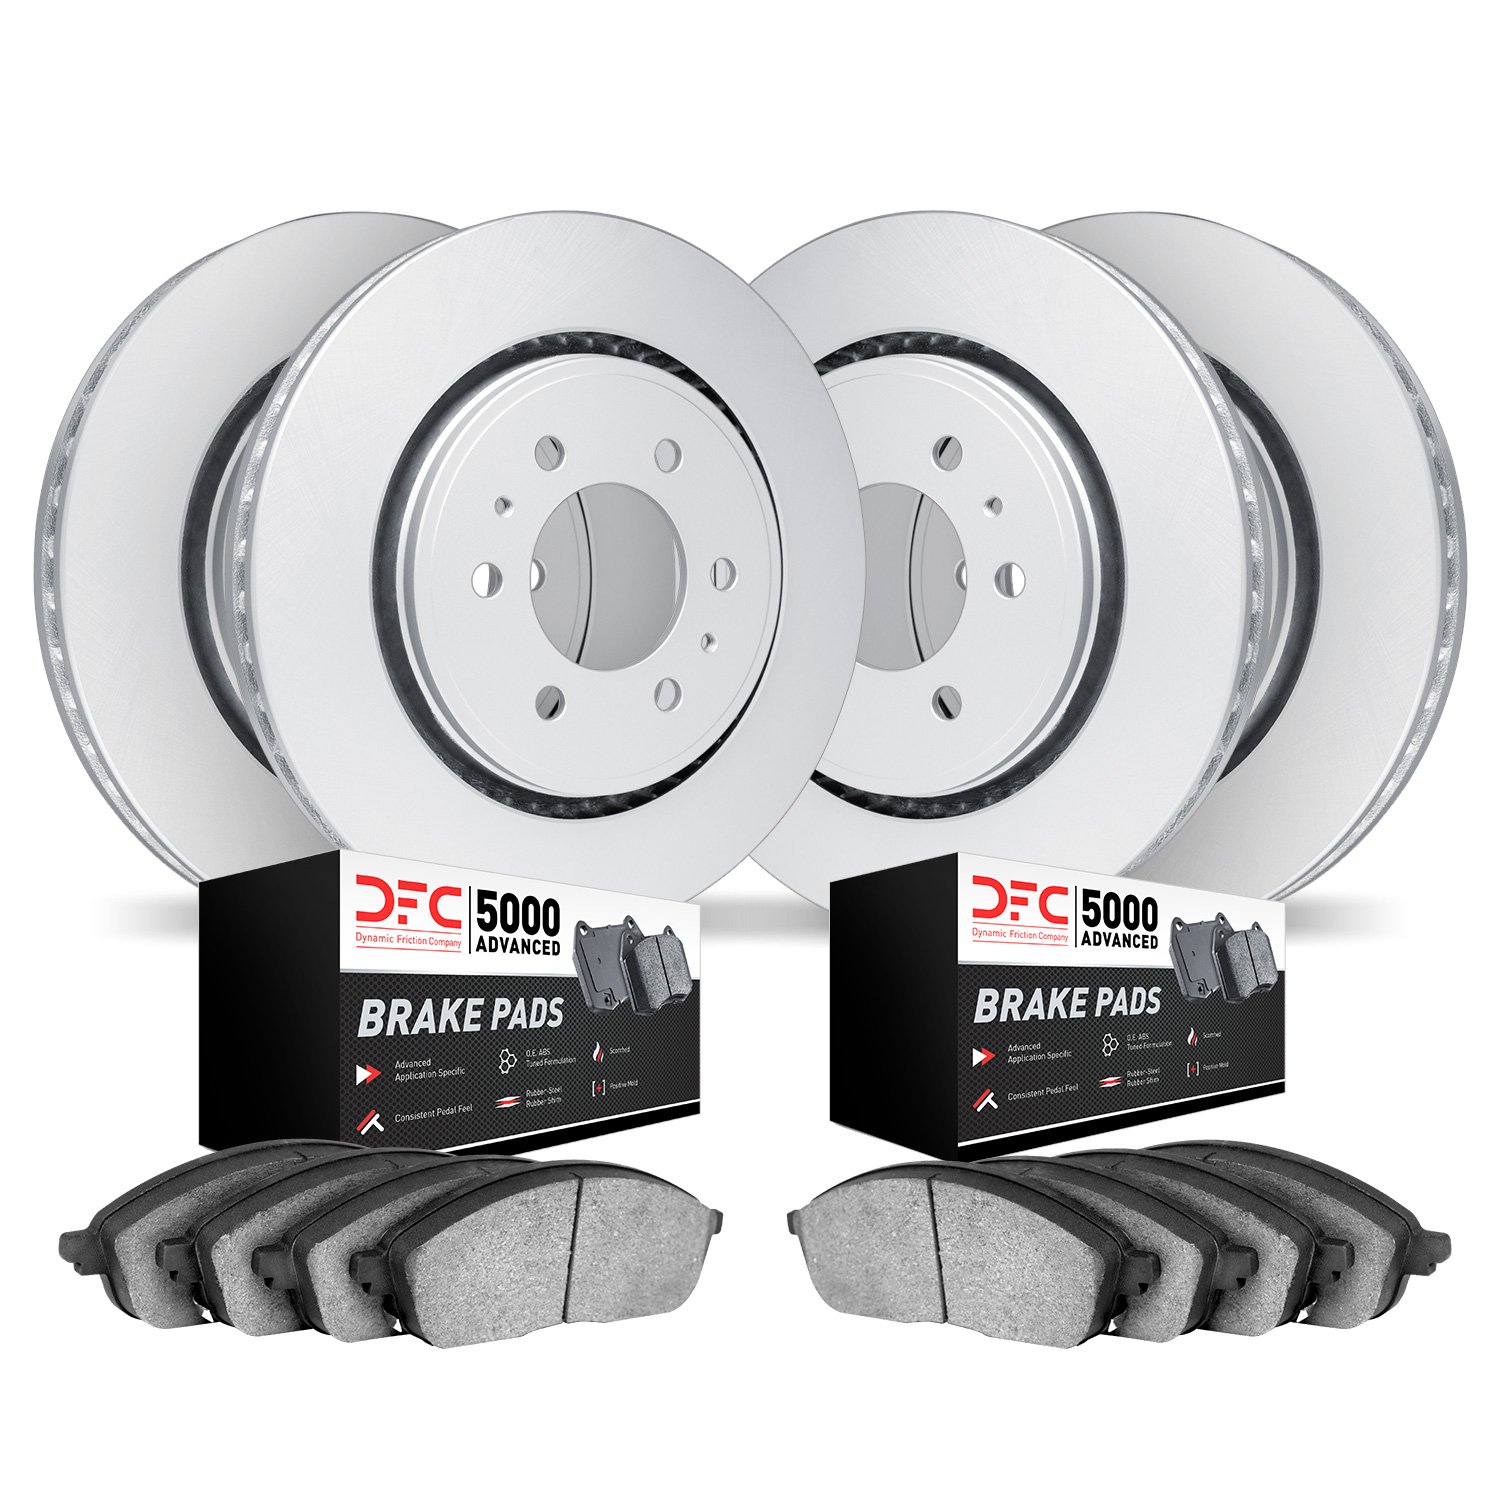 4504-54096 Geospec Brake Rotors w/5000 Advanced Brake Pads Kit, 2012-2020 Ford/Lincoln/Mercury/Mazda, Position: Front and Rear